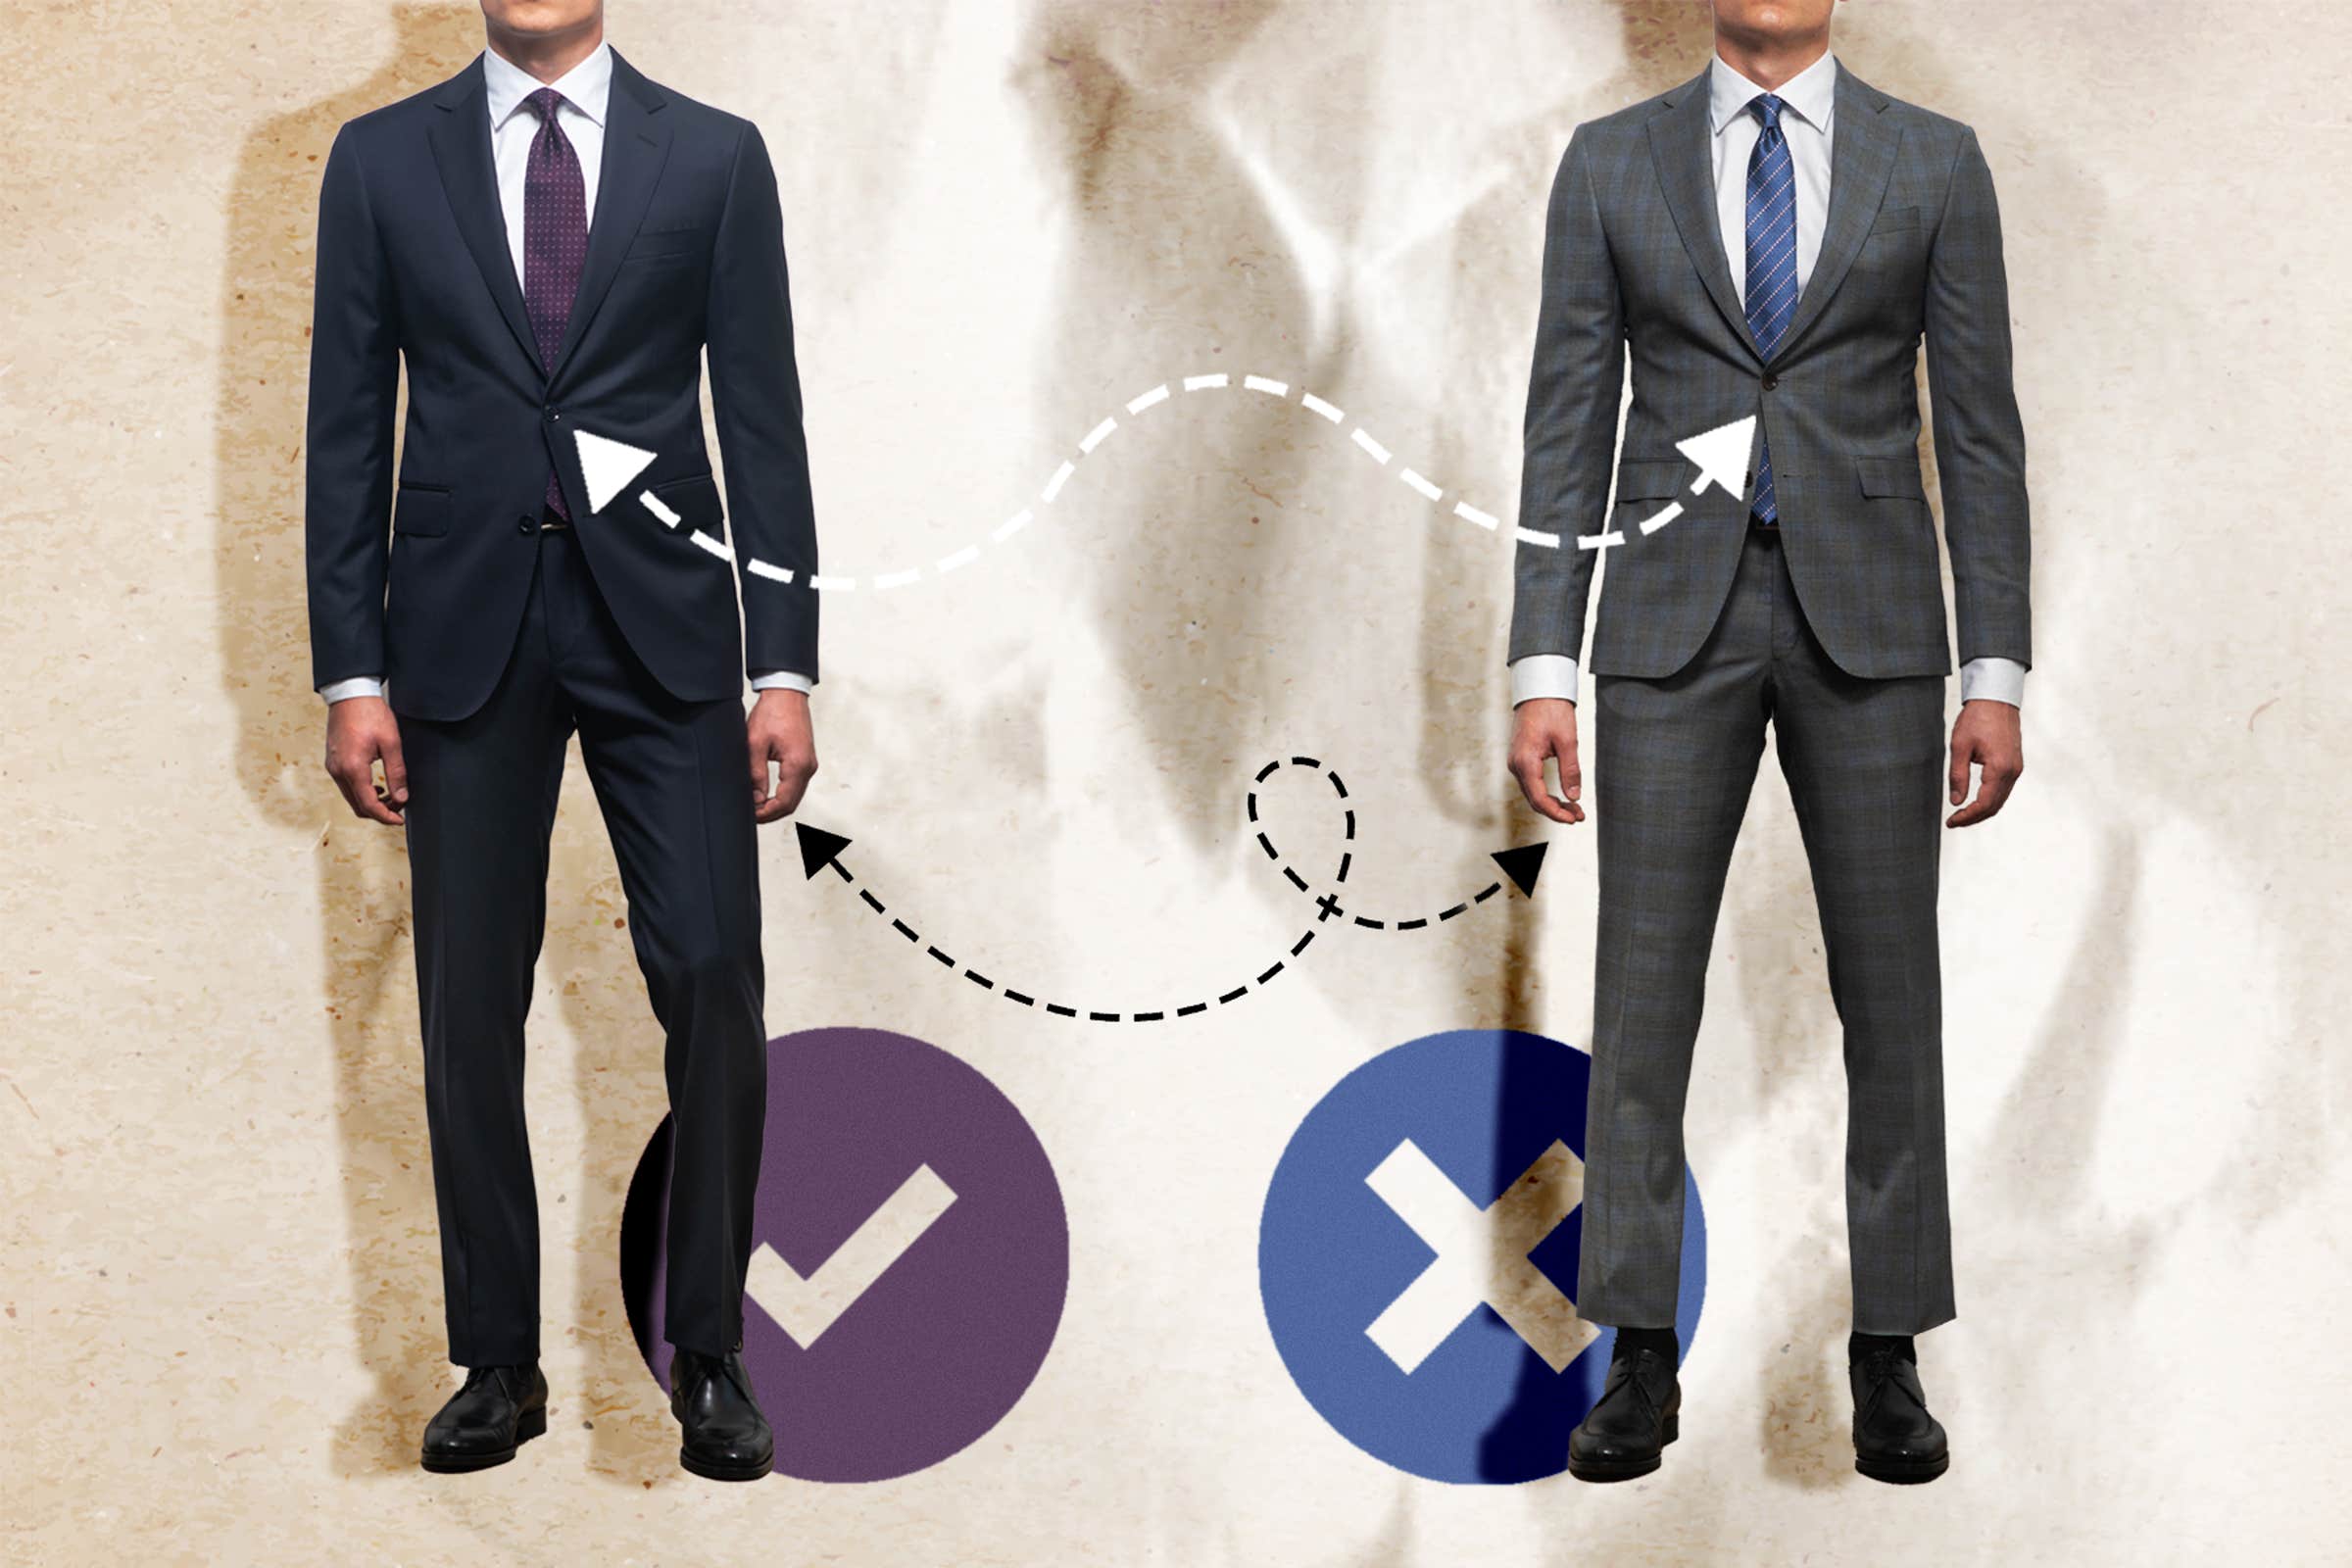 Top 10 Signs You’re in a Poor-Fitting Suit